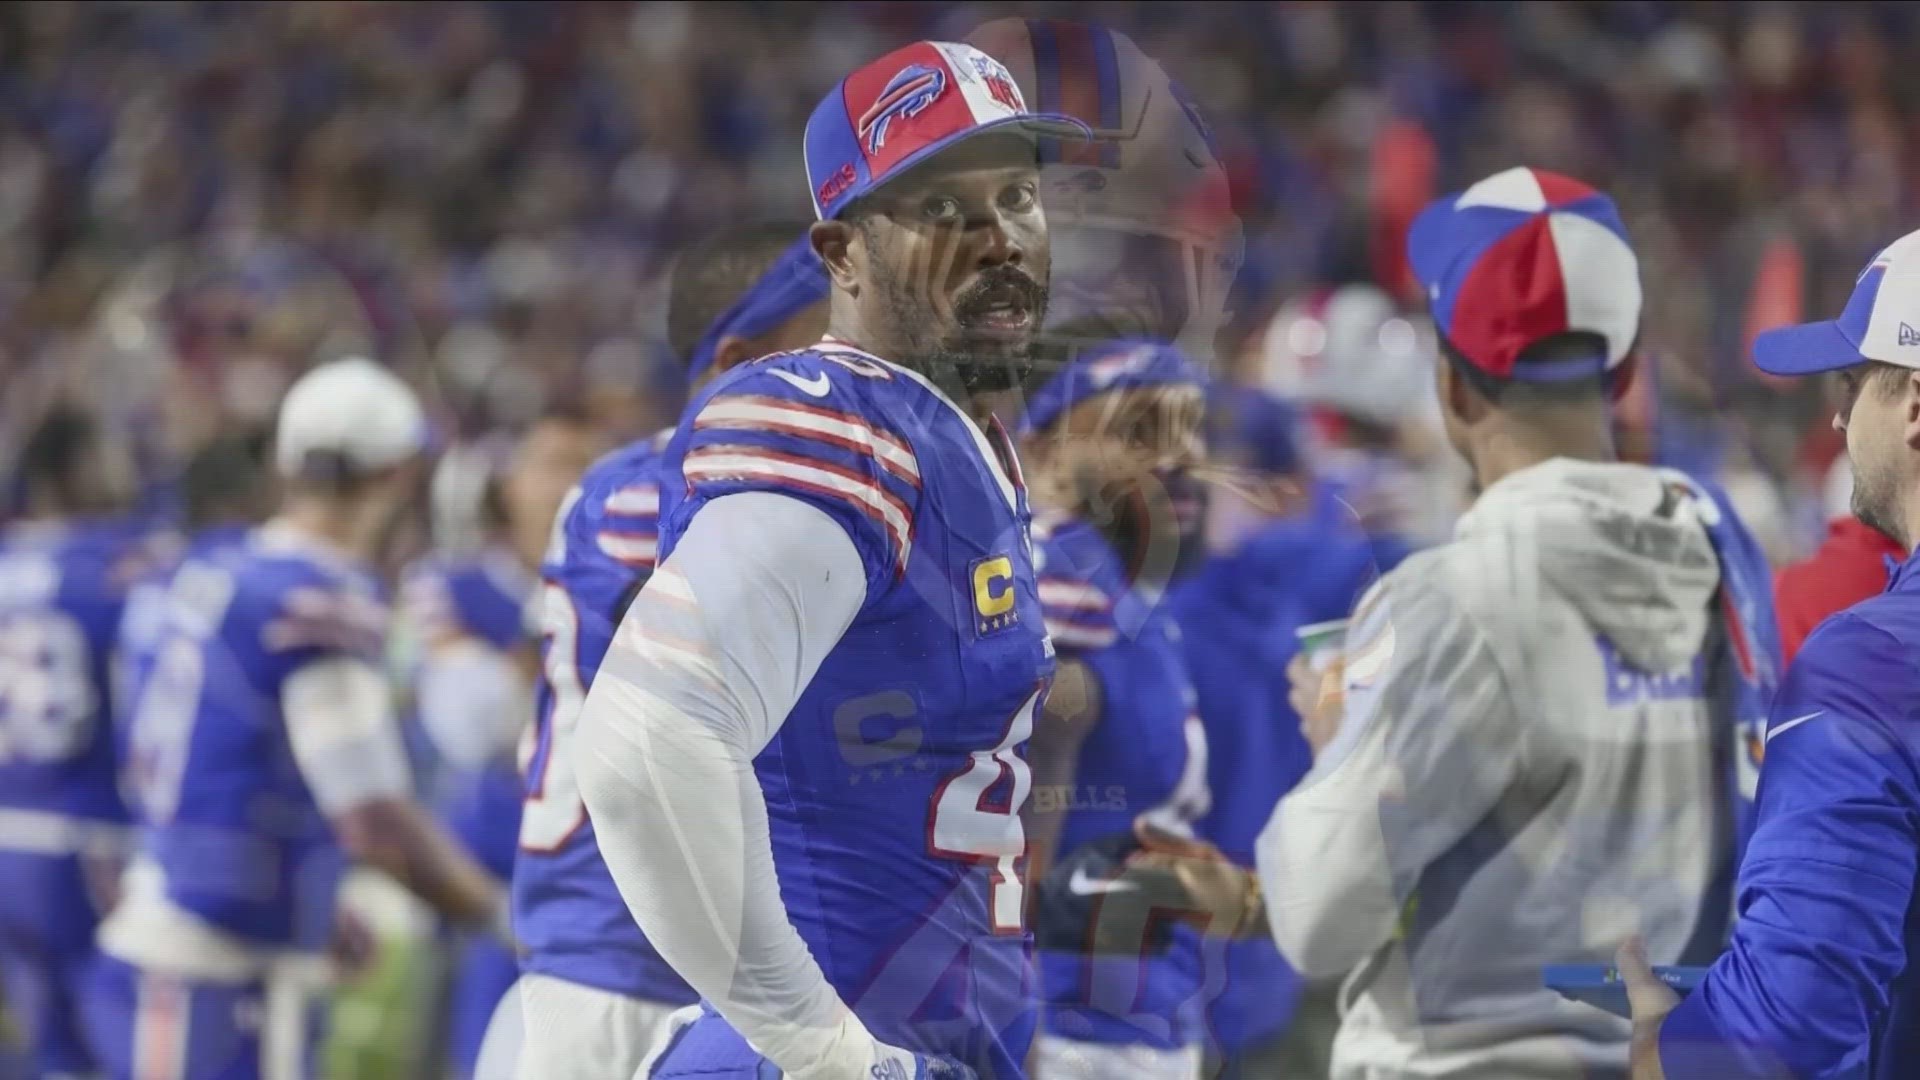 "The alleged victim had been in an argument when Miller allegedly assaulted her," police said after responding to a call involving the Bills' Von Miller.